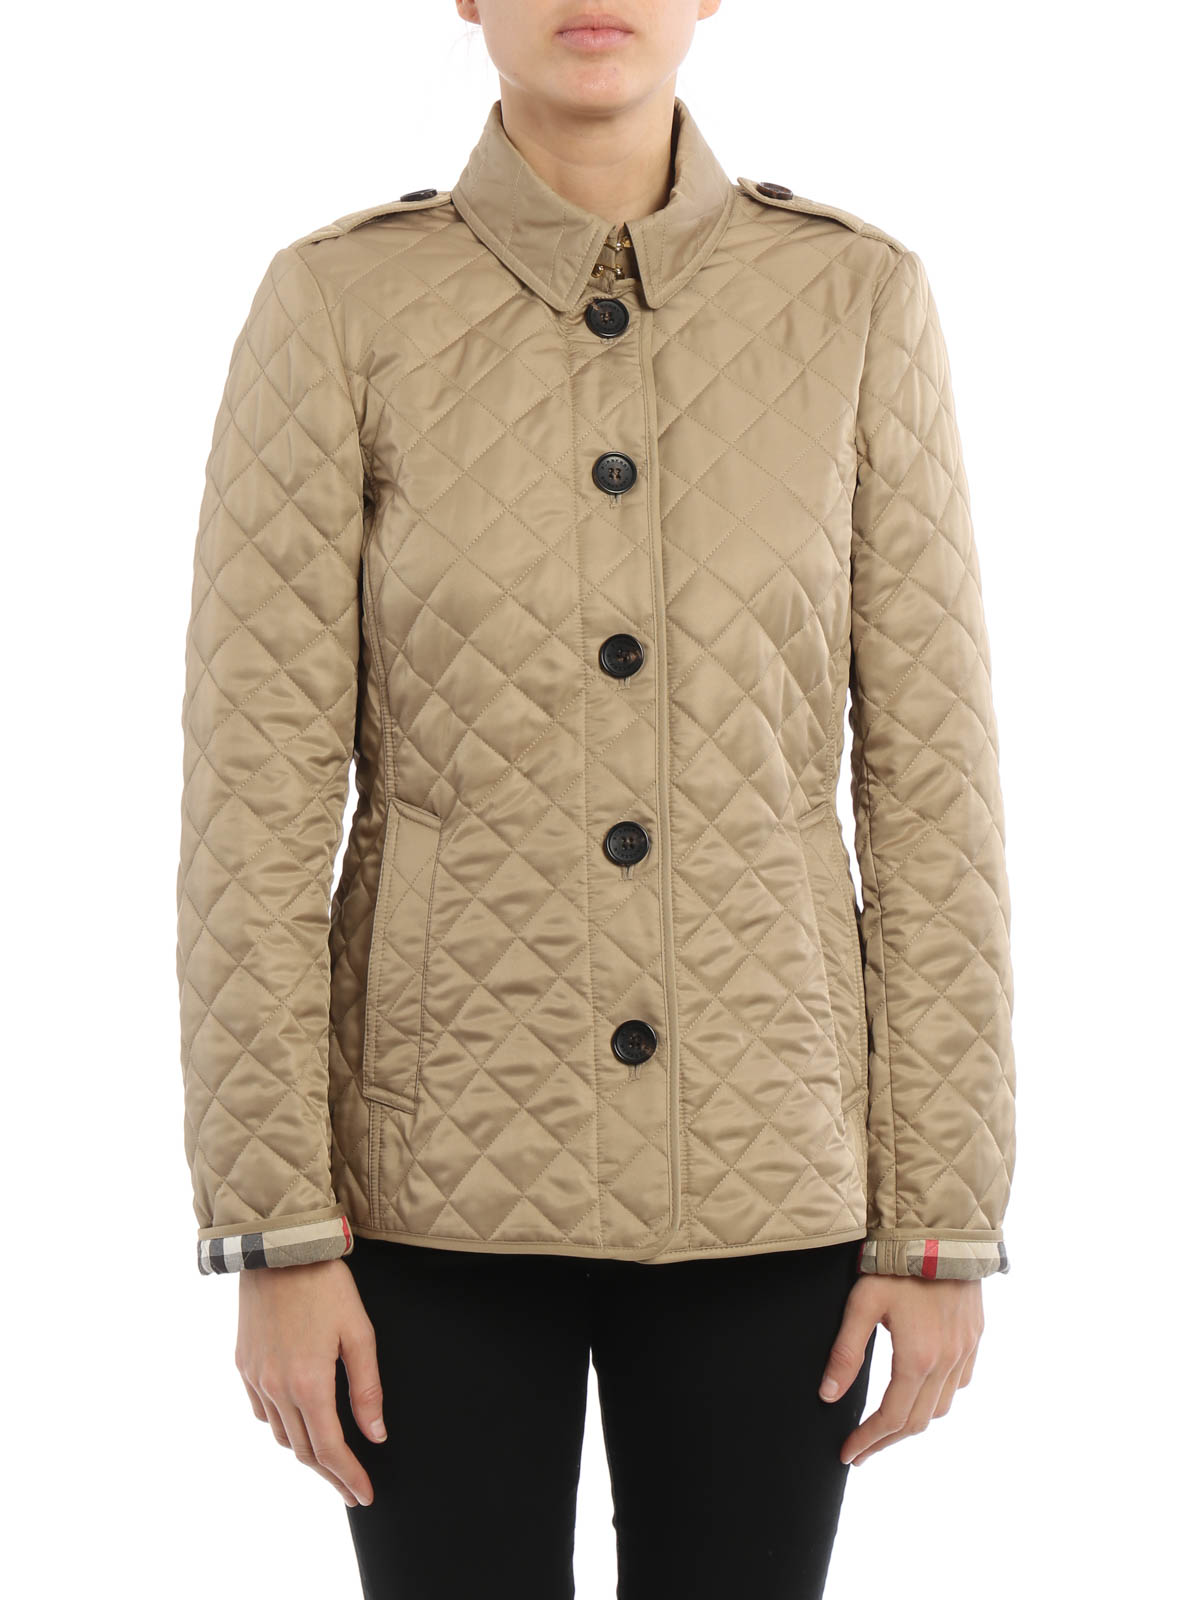 burberry ashurst quilted jacket sale